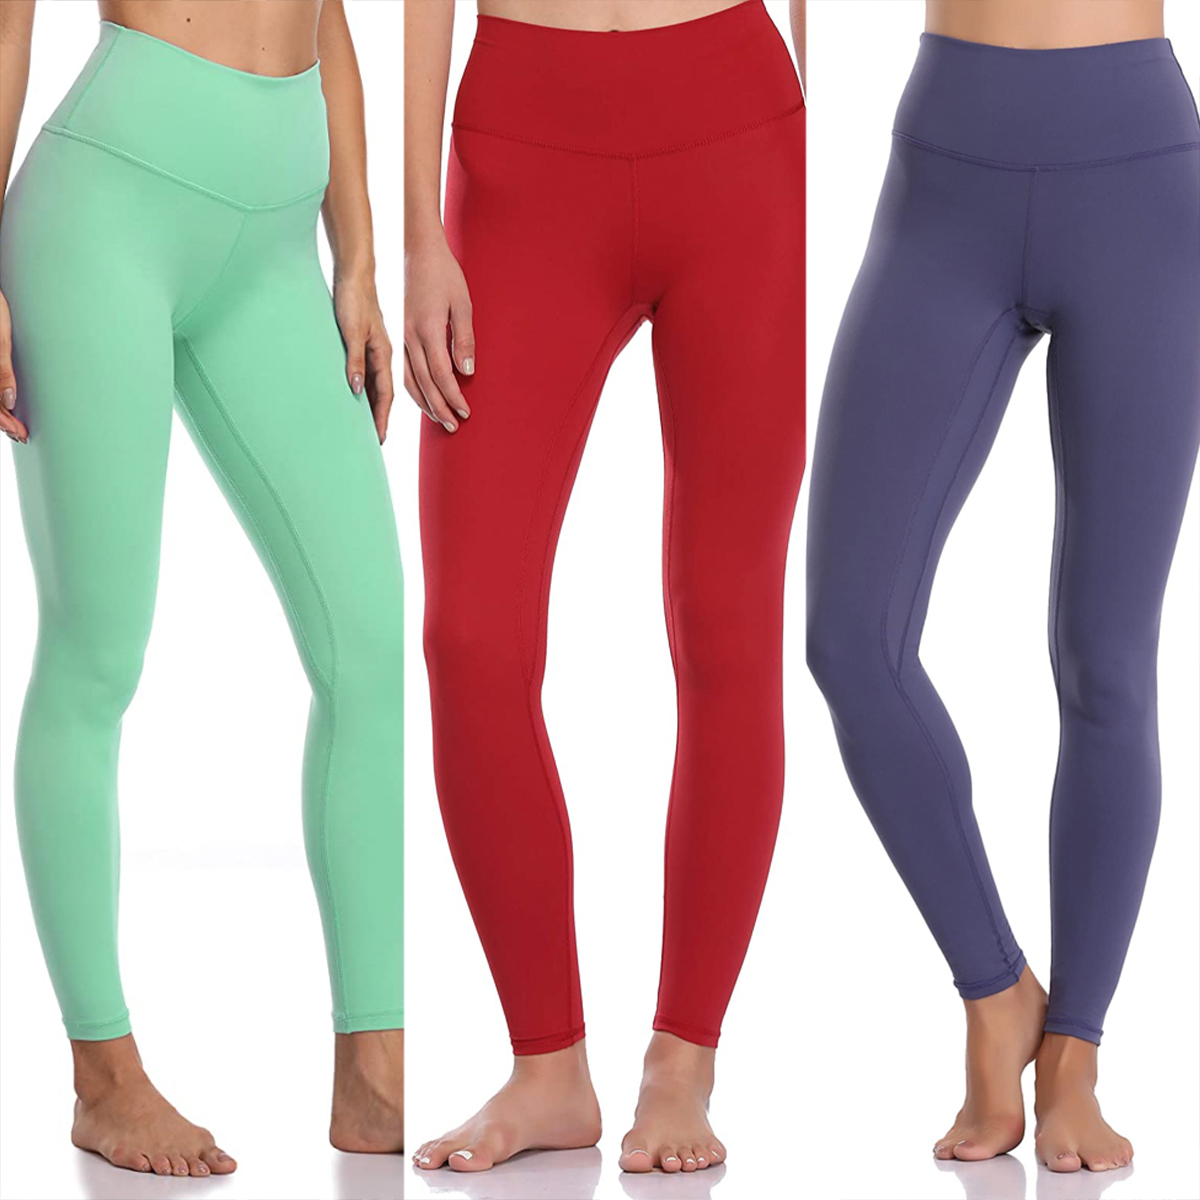 Ok how are these leggings? Paragon? I like lululemon contour fit as they  hold me just right but like these colors and what they are claiming. Do  they feel cheap like some